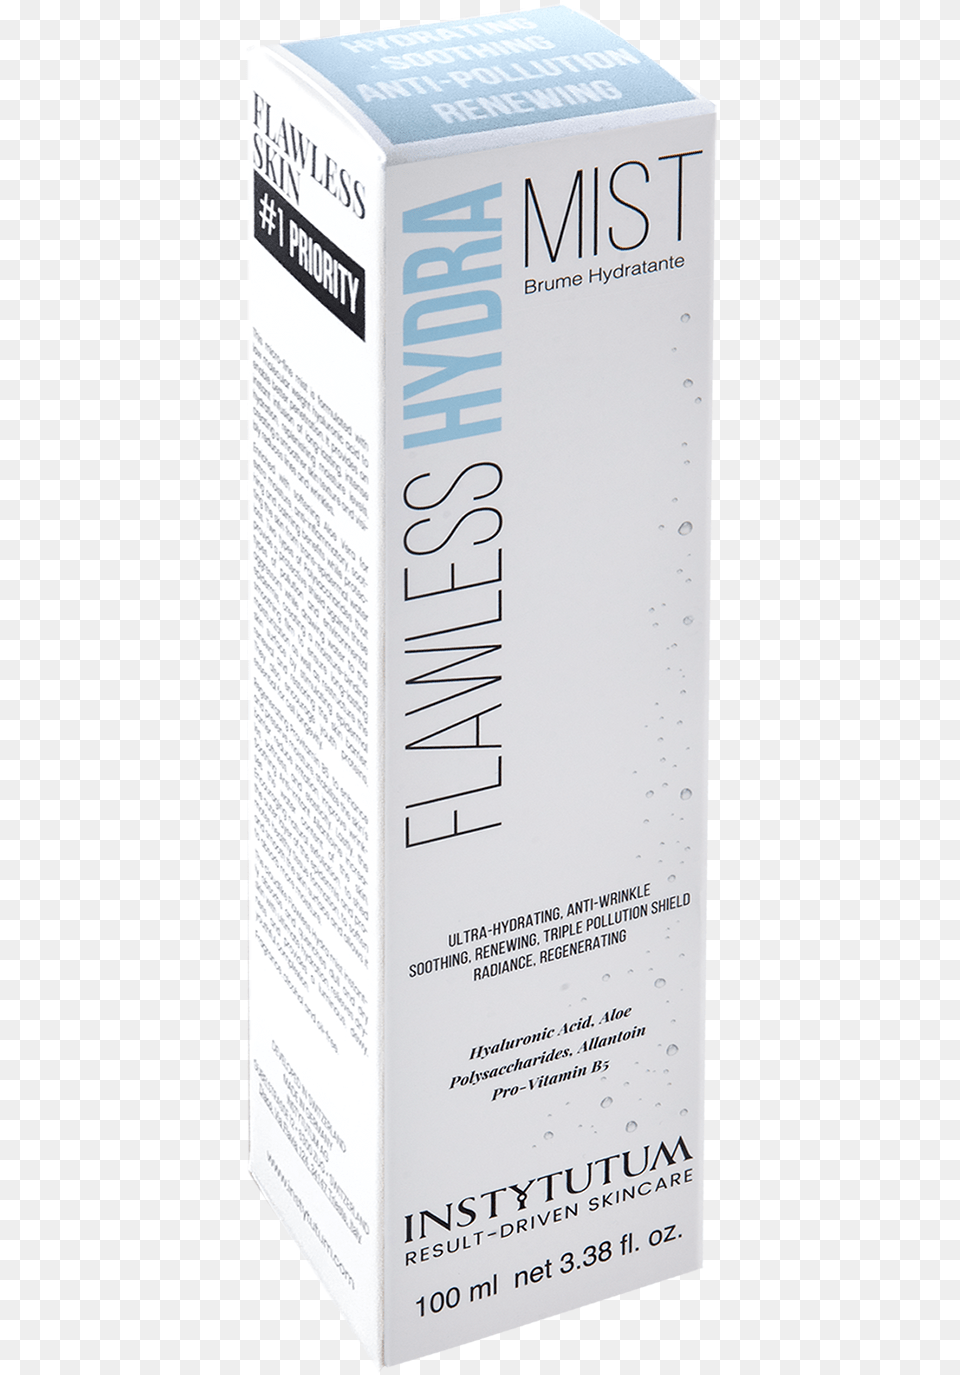 Flawless Hydra Mist Box, Book, Publication, Bottle Png Image